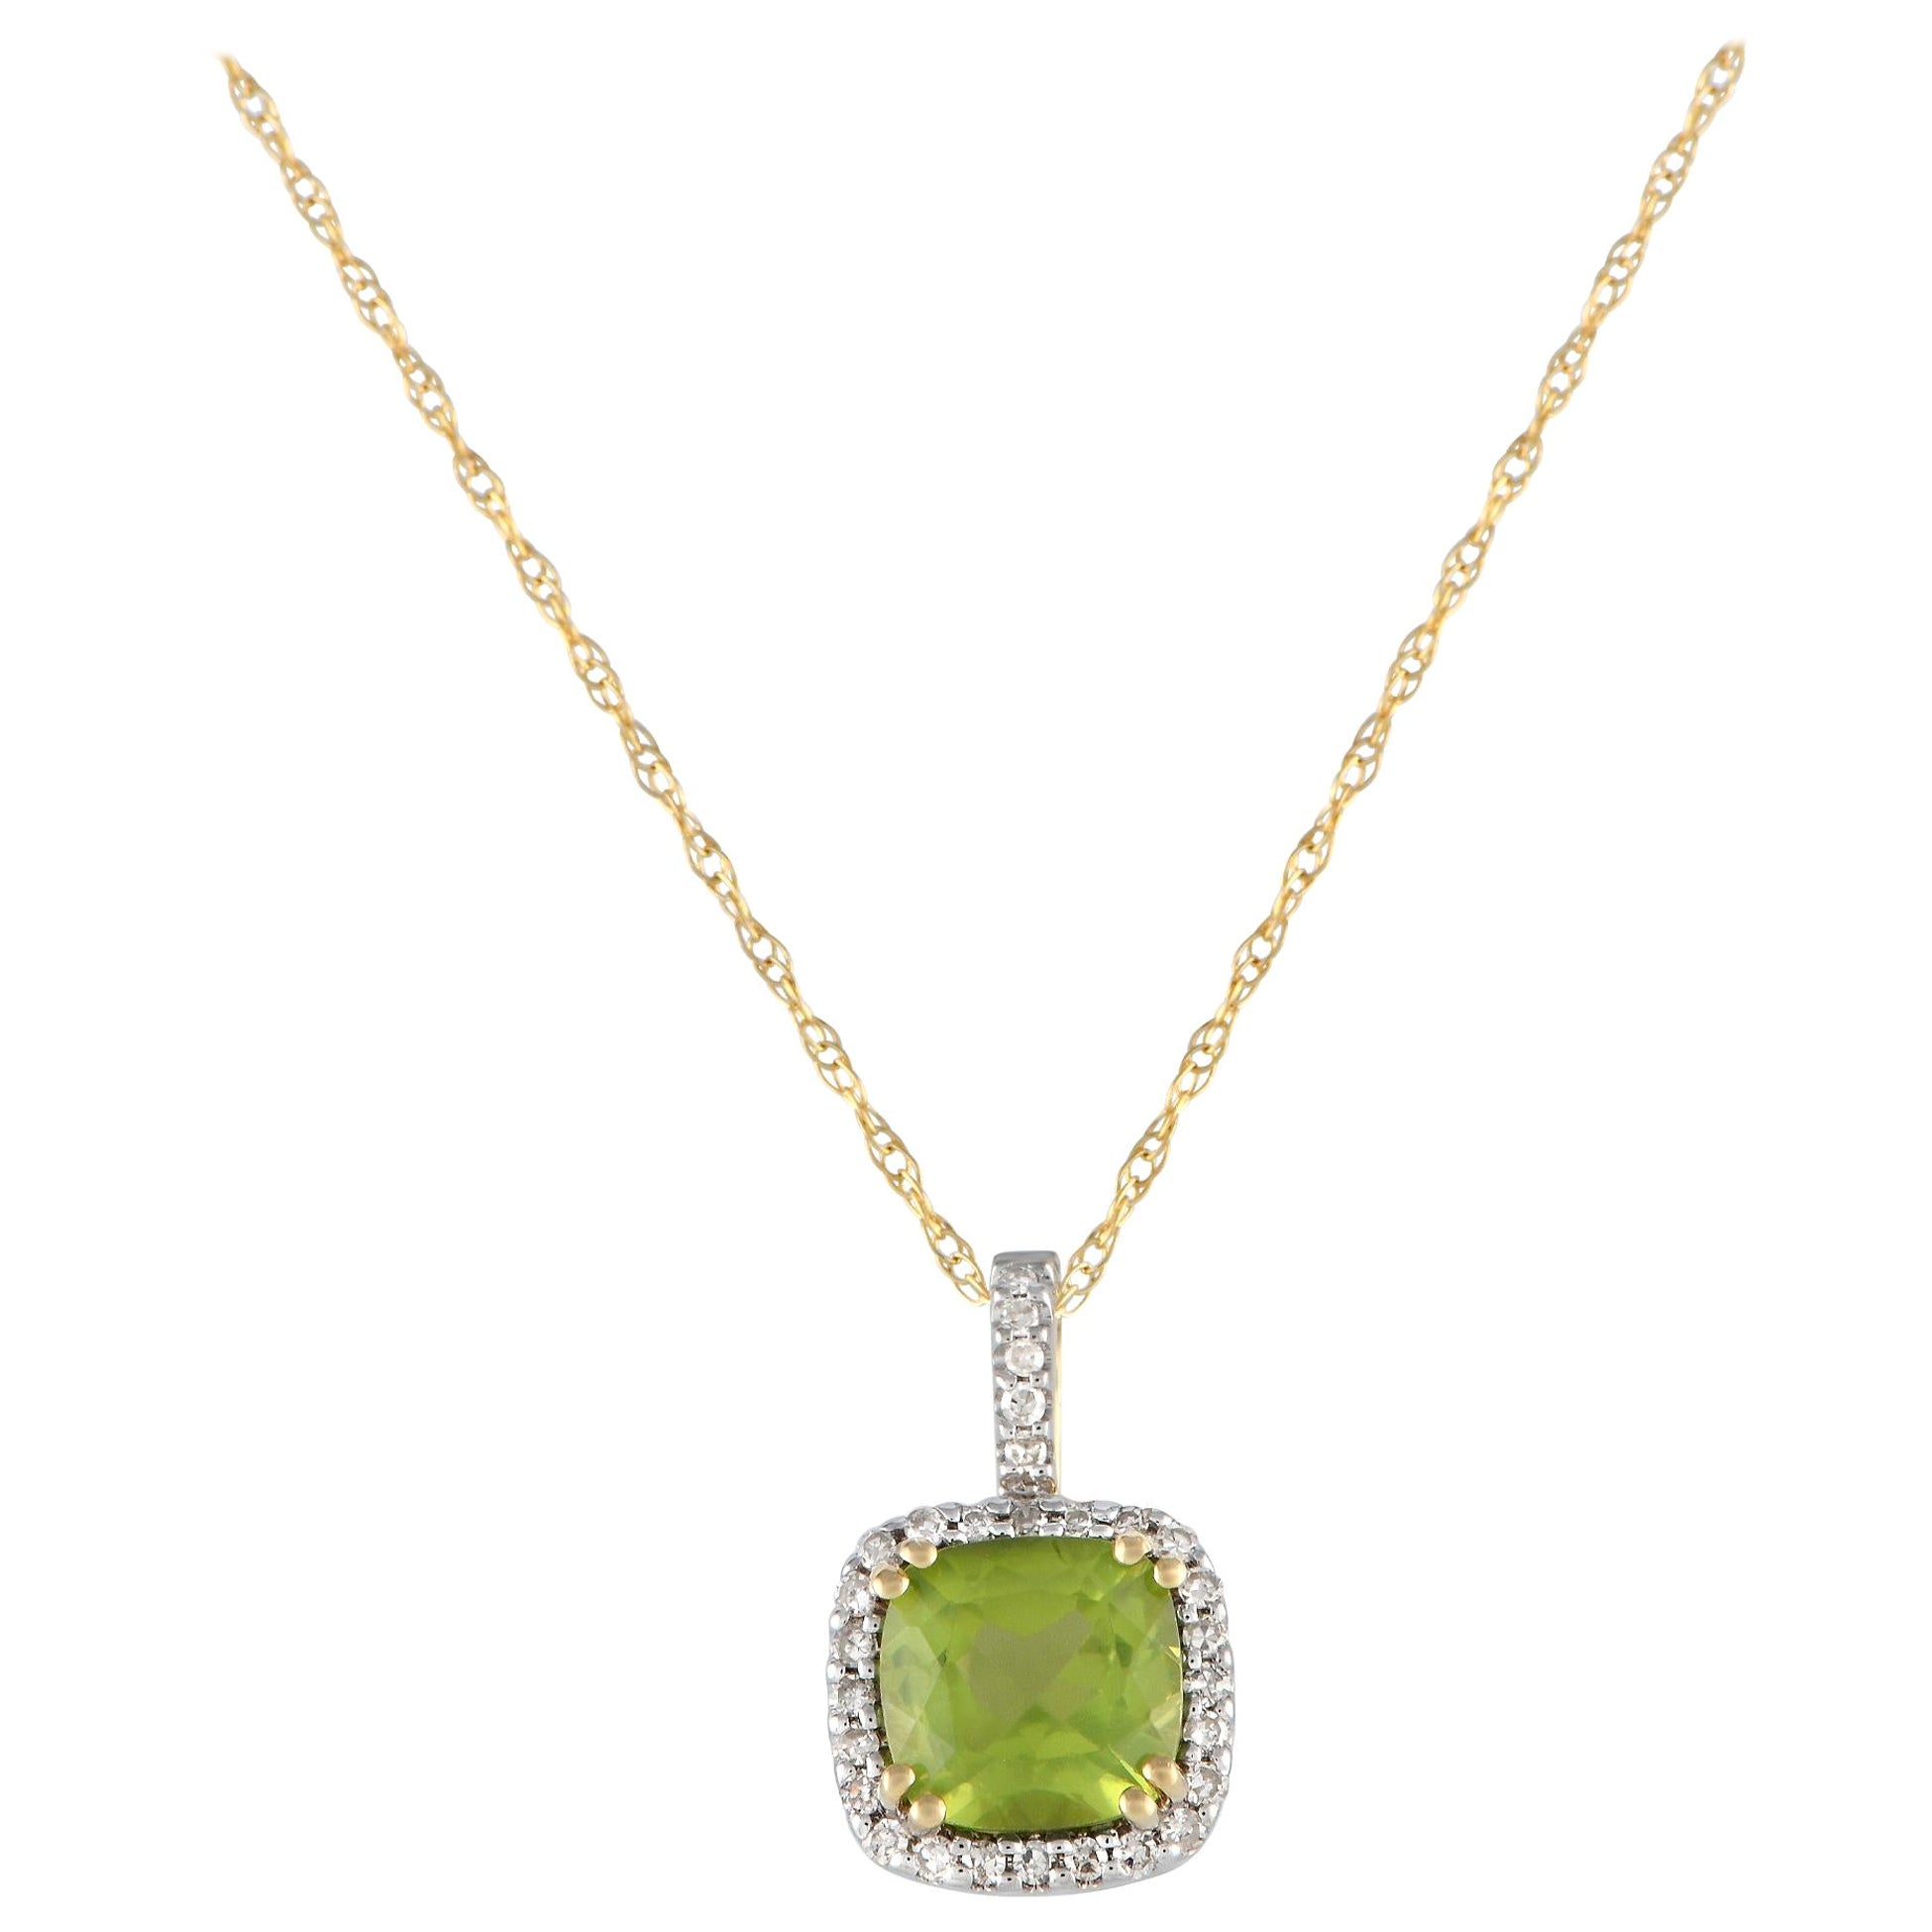 LB Exclusive 14K Yellow Gold 0.09ct Diamond Pendant Necklace PD4-16269YPE For Sale